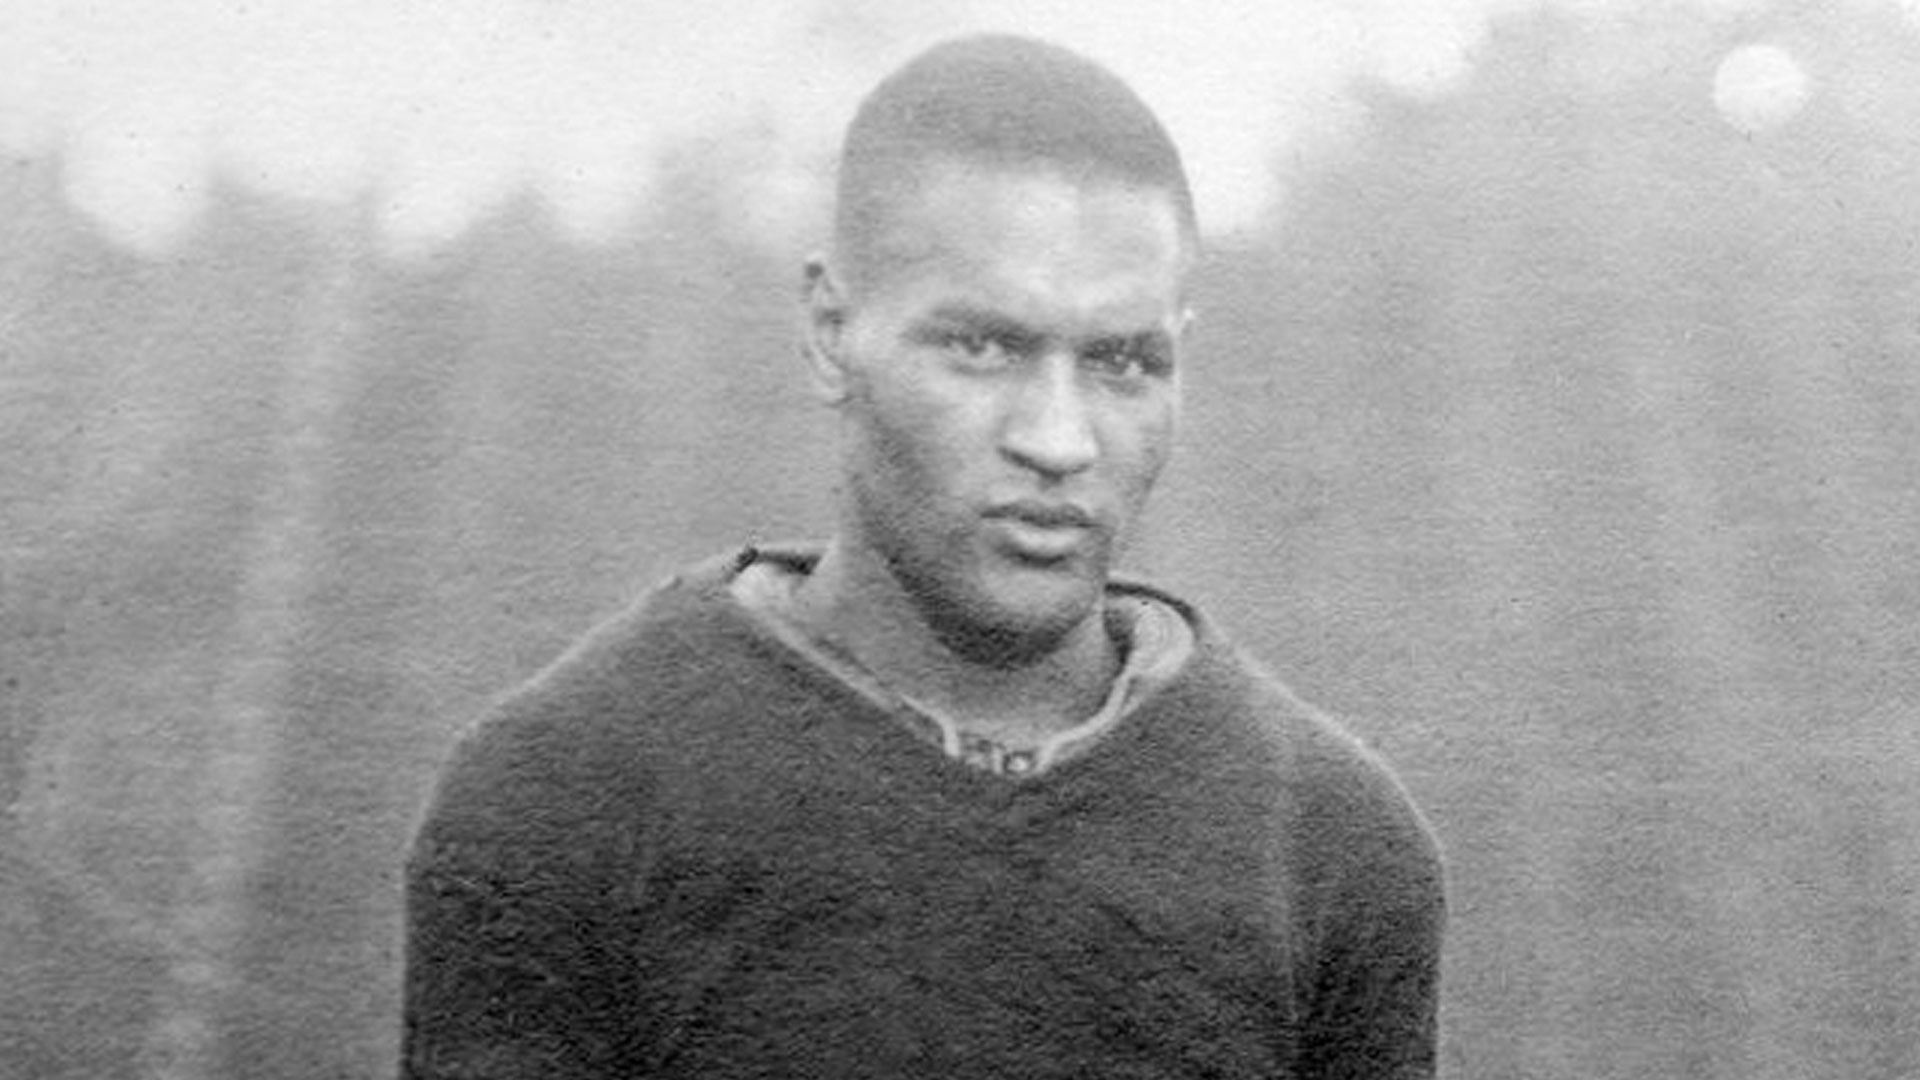 All American – The Walter Gordon Story